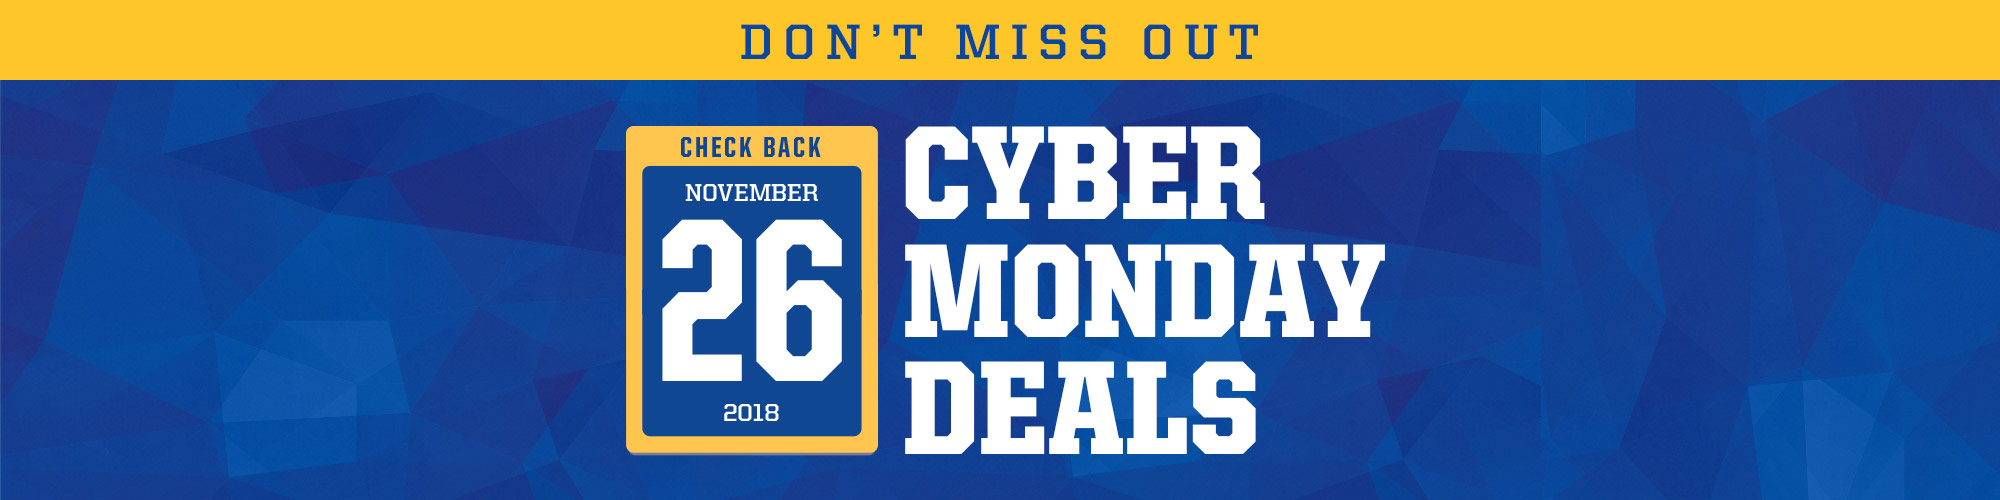 Check Back November 26, 2018 for more Cyber Monday Deals.